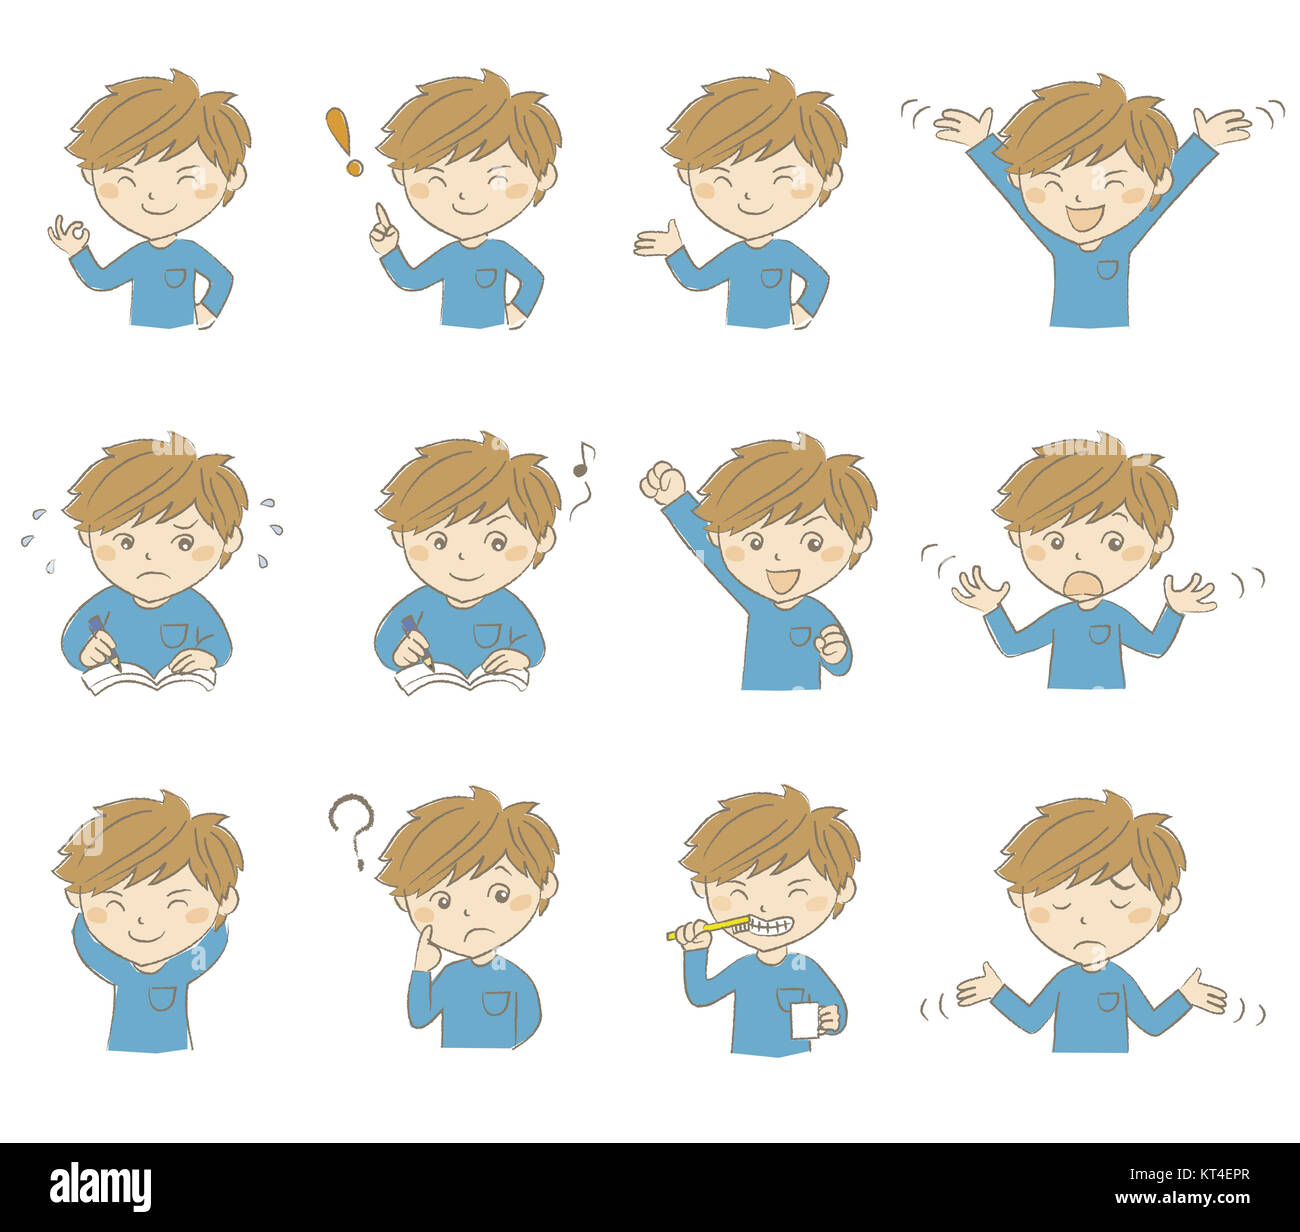 Young boy with various poses and emotions Stock Photo